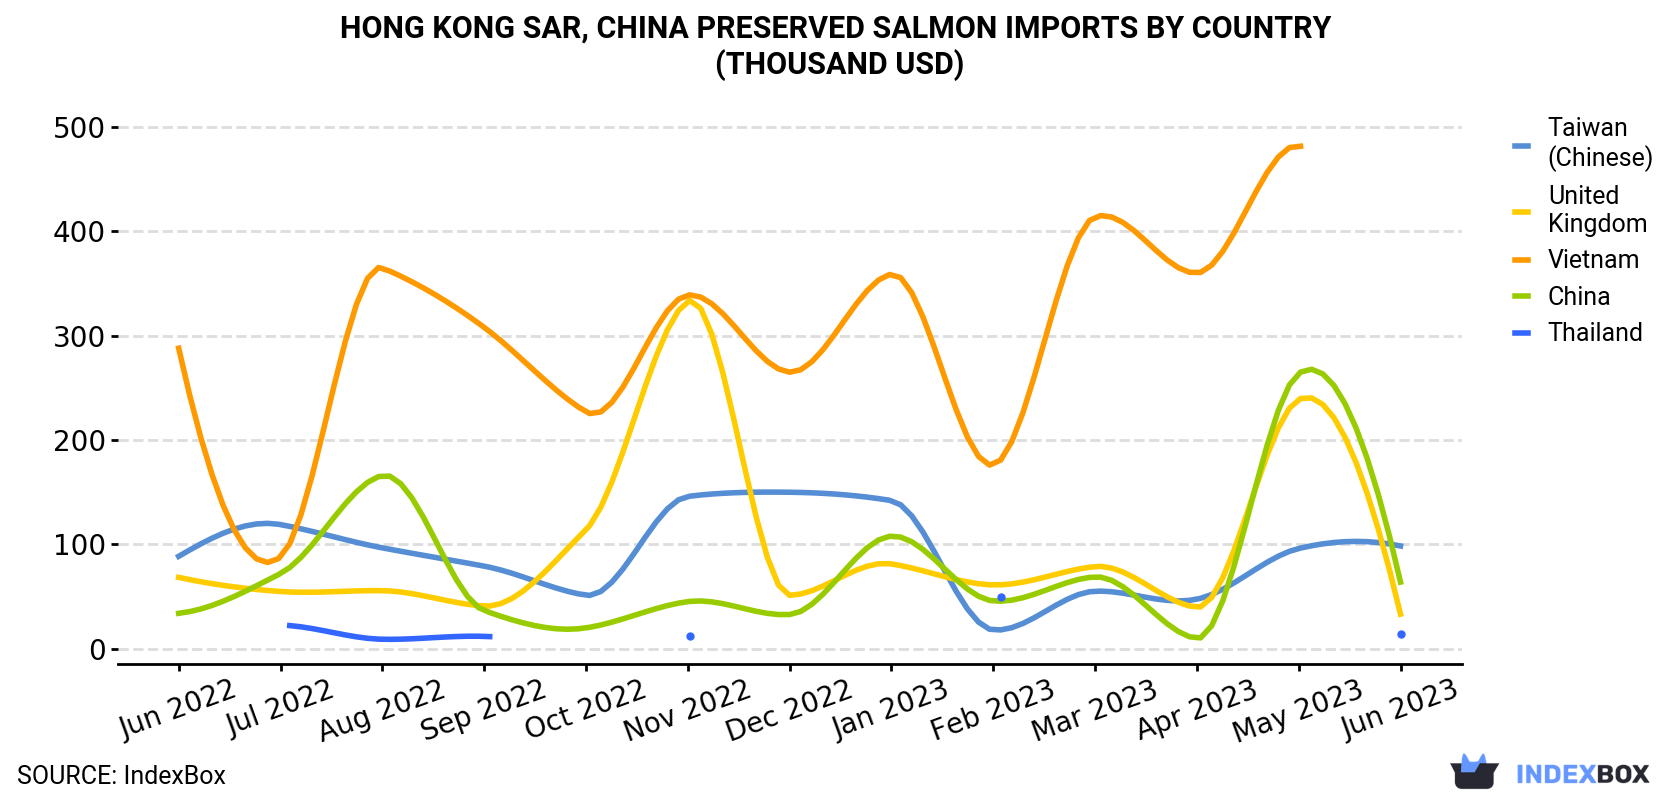 Hong Kong Preserved Salmon Imports By Country (Thousand USD)